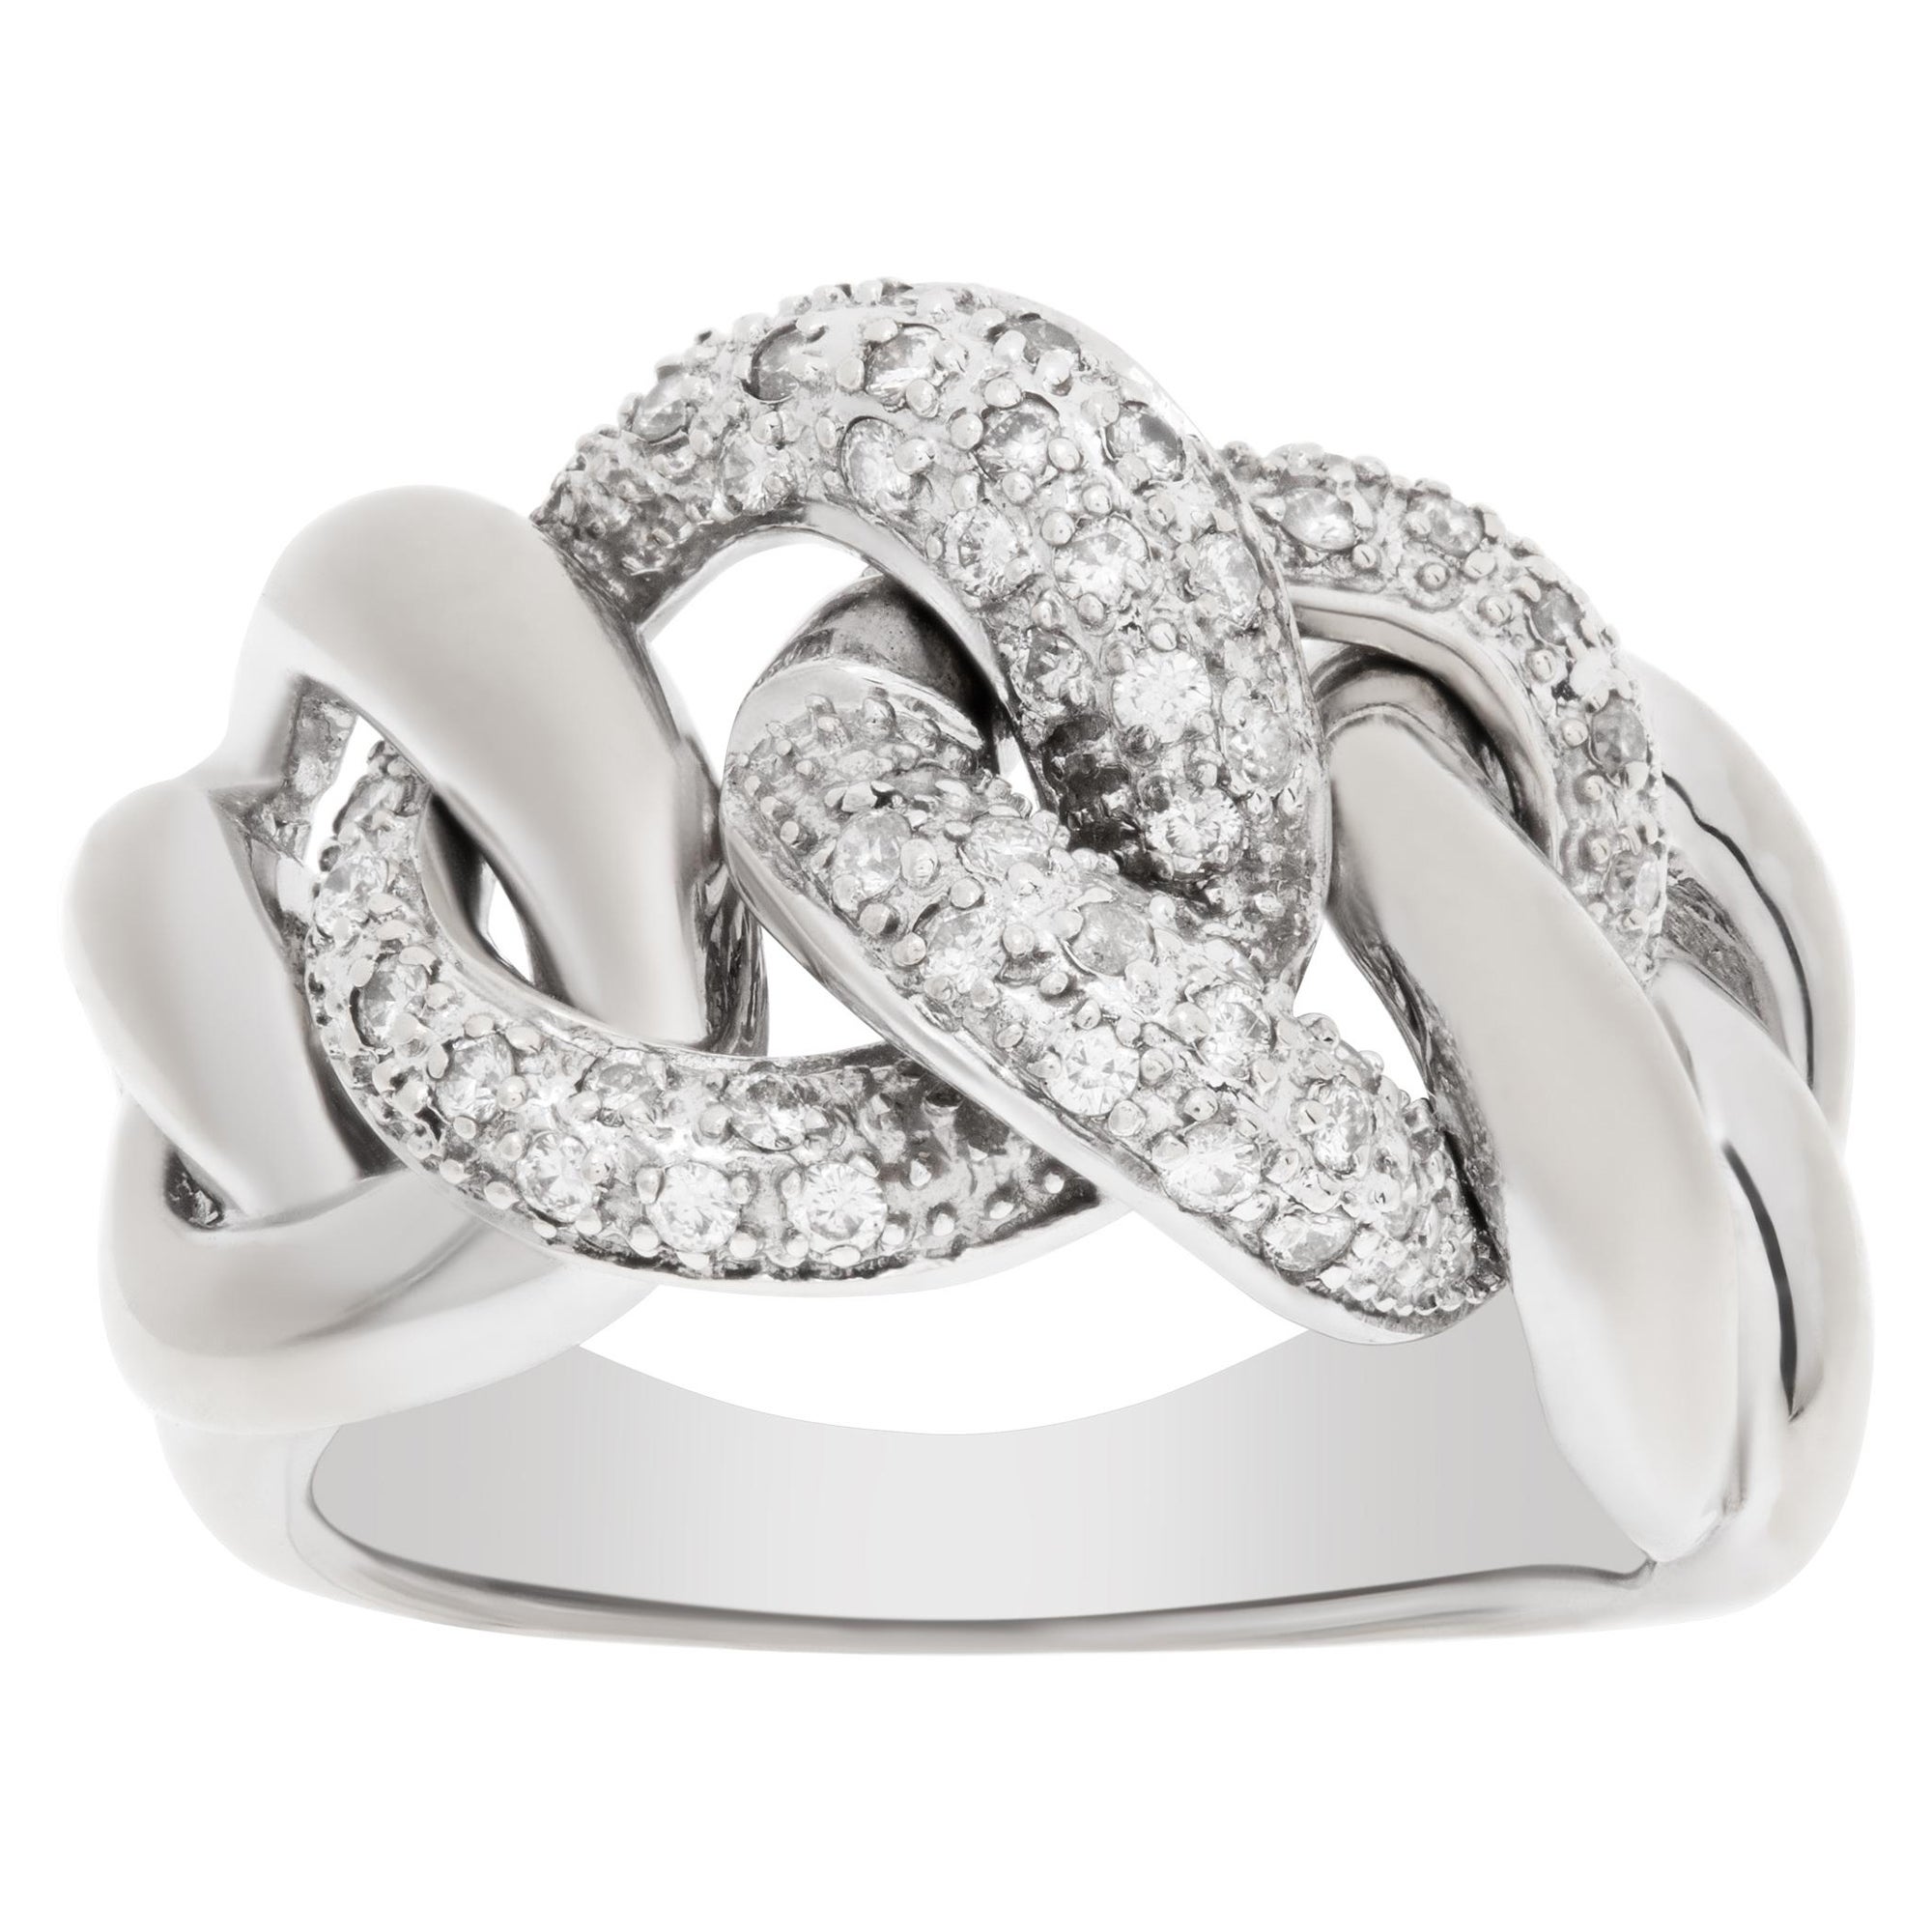 Pave Diamond link ring in 14k white gold. 0.50 carats in diamonds.  For Sale